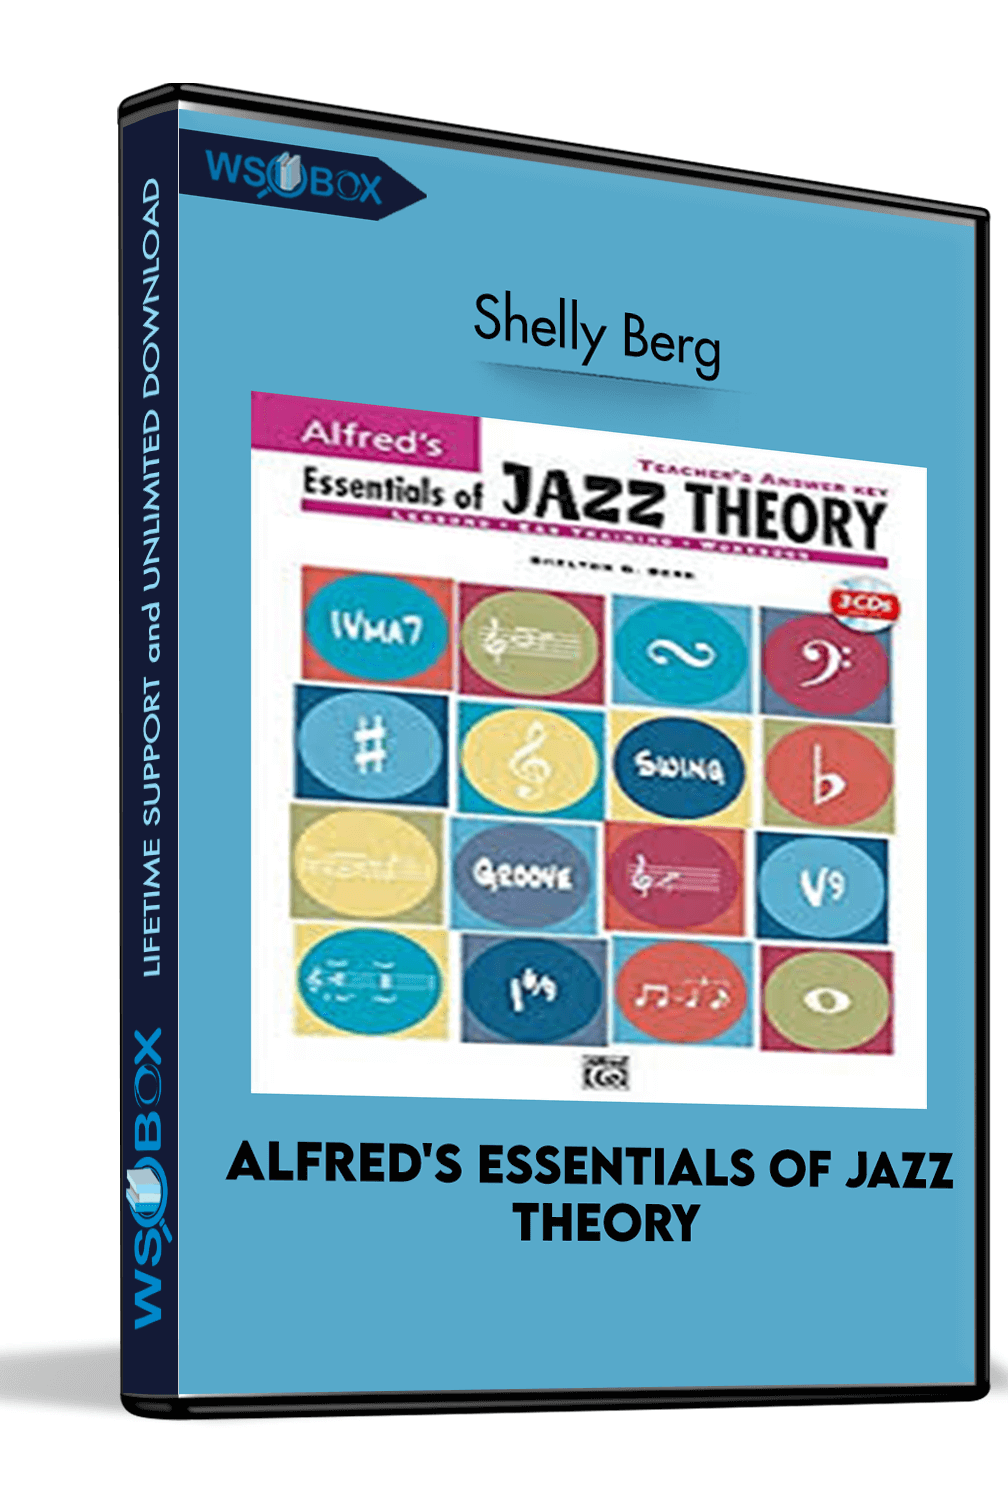 Alfred’s Essentials of Jazz Theory – Shelly Berg